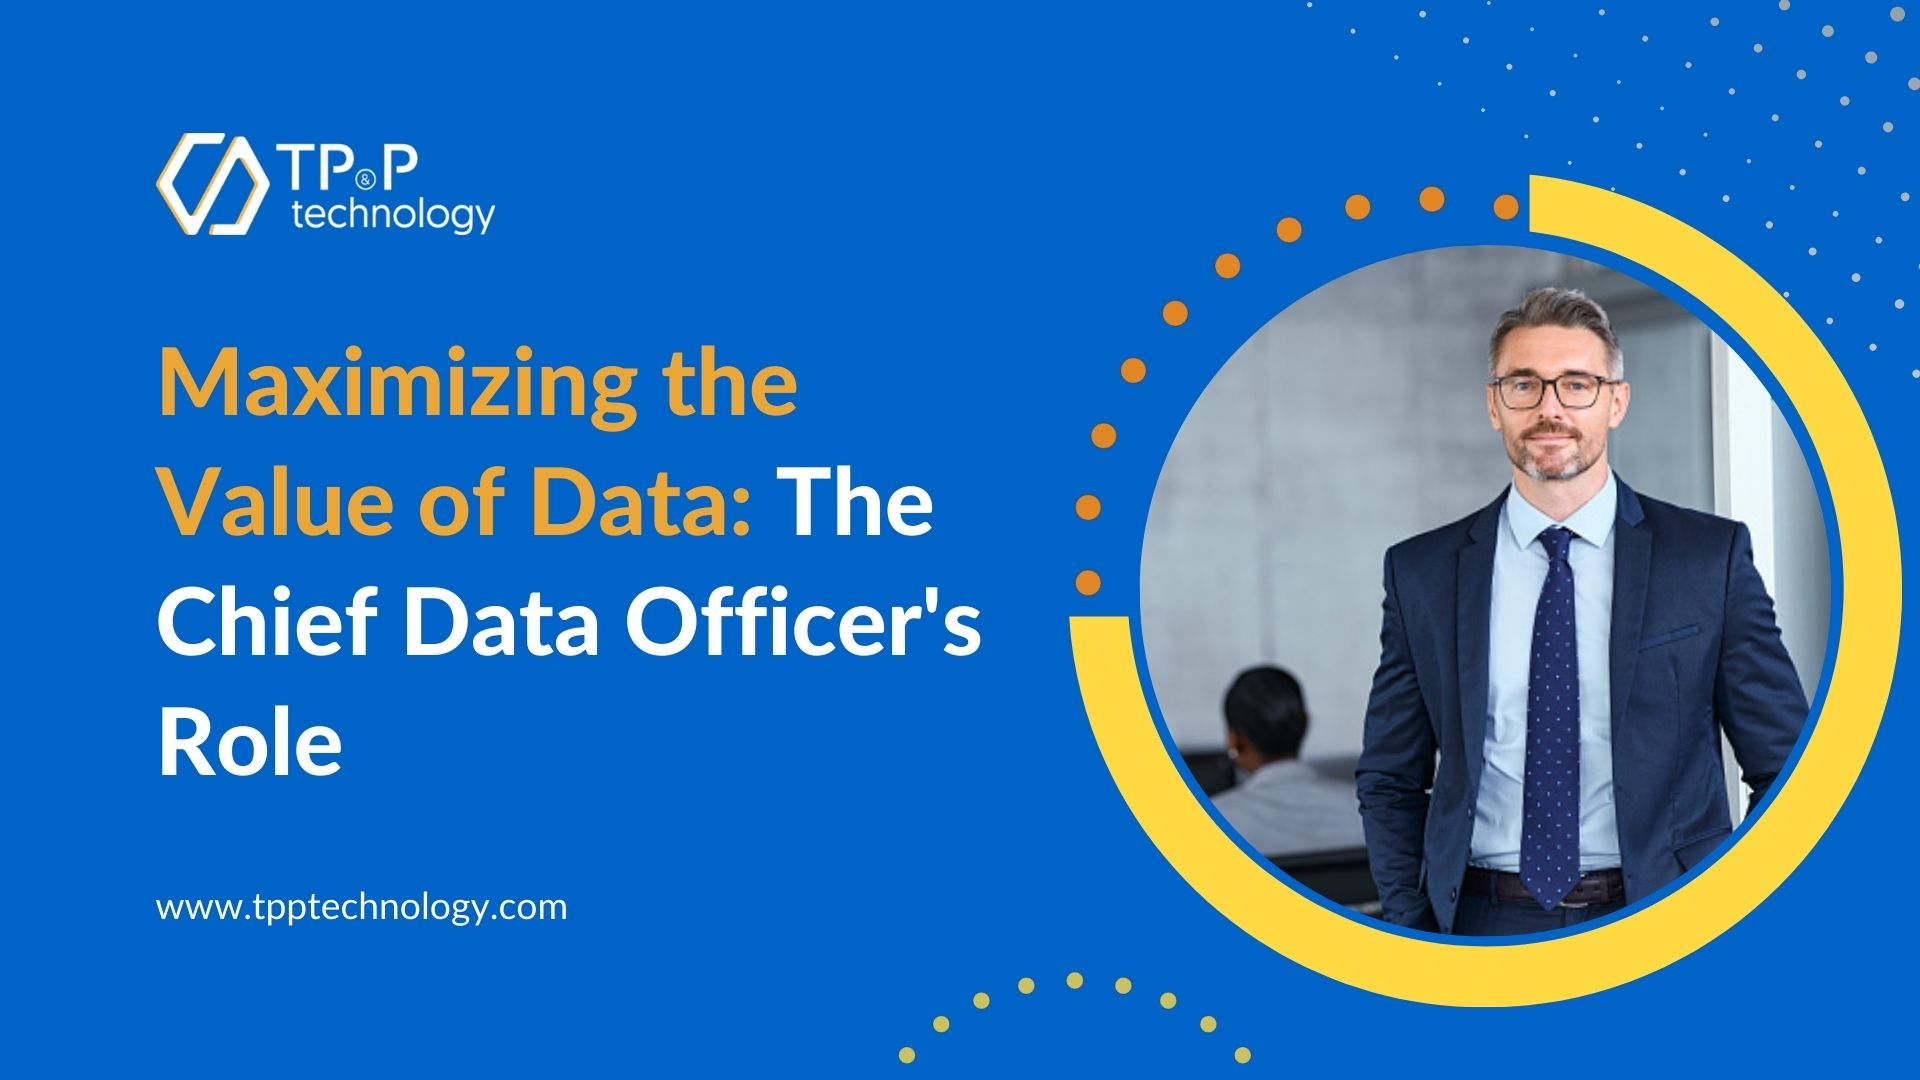 Maximizing the Value of Data: The Chief Data Officer's Role